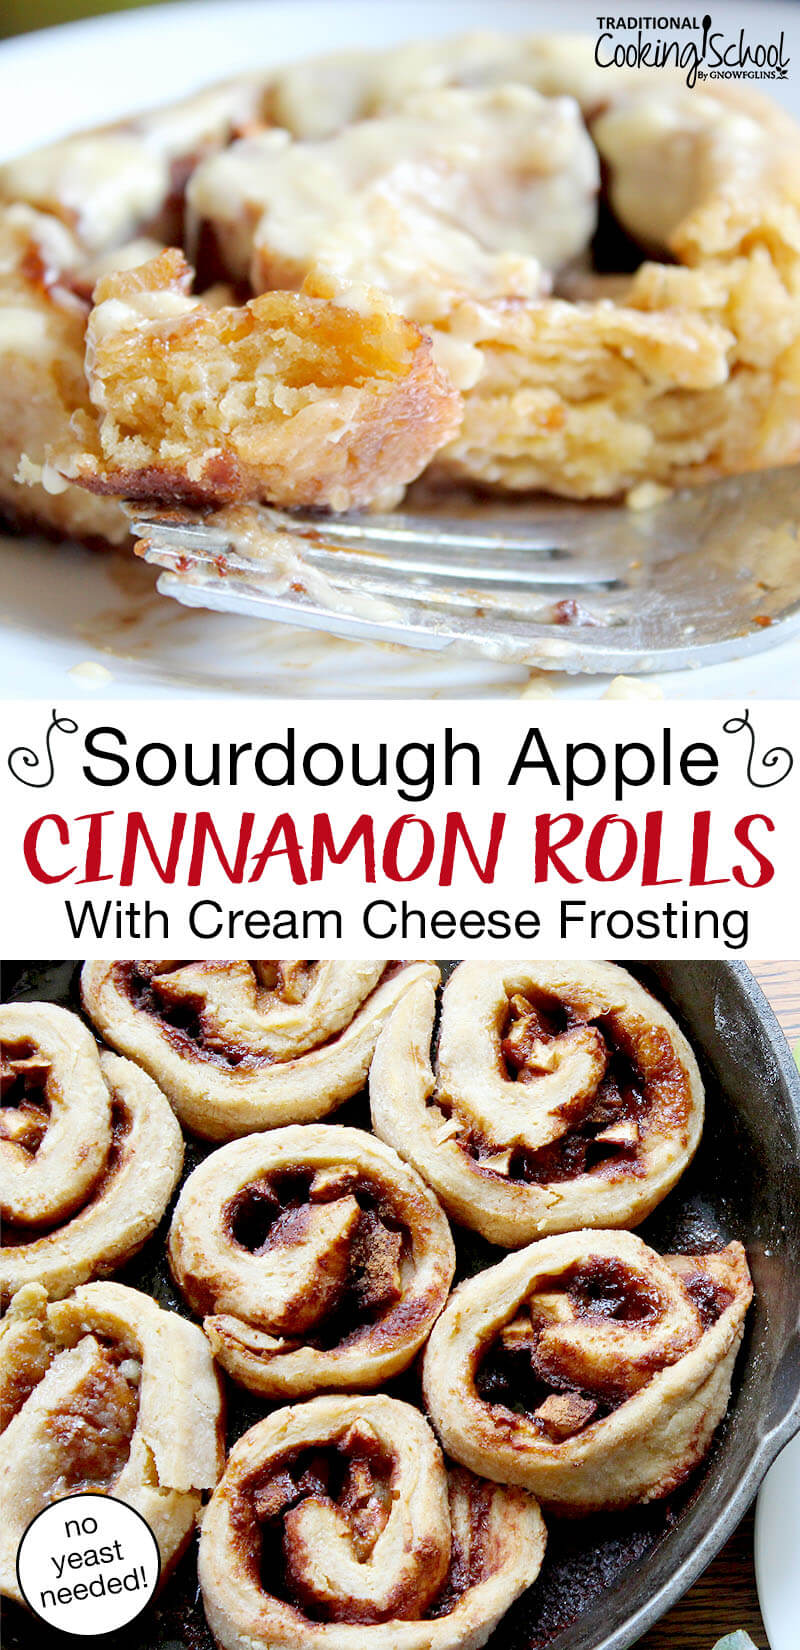 Photo collage of cinnamon rolls baking in a cast iron skillet, and on a plate with frosting. Text overlay says: "Sourdough Apple Cinnamon Rolls With Cream Cheese Frosting (no yeast needed!)"